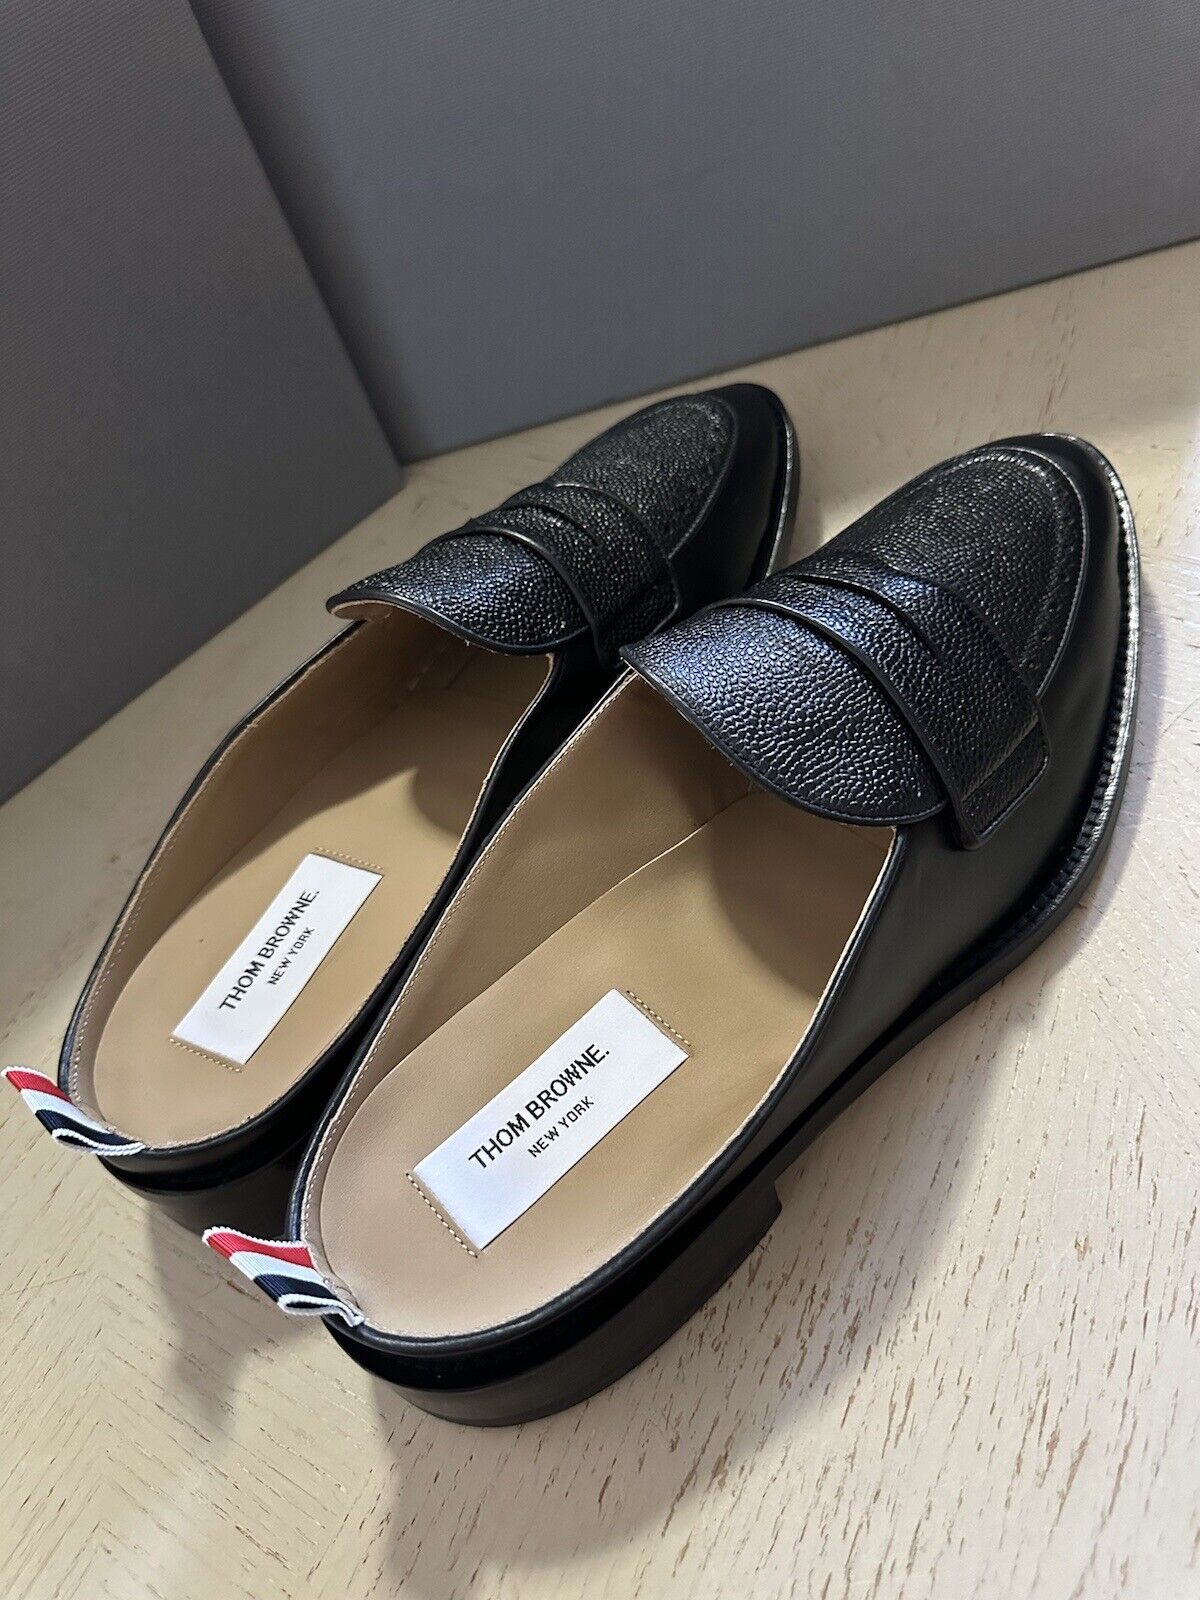 NIB Thom Browne Men Leather Penny Loafers Sandal Shoes Black 9 US / 42 EU Italy